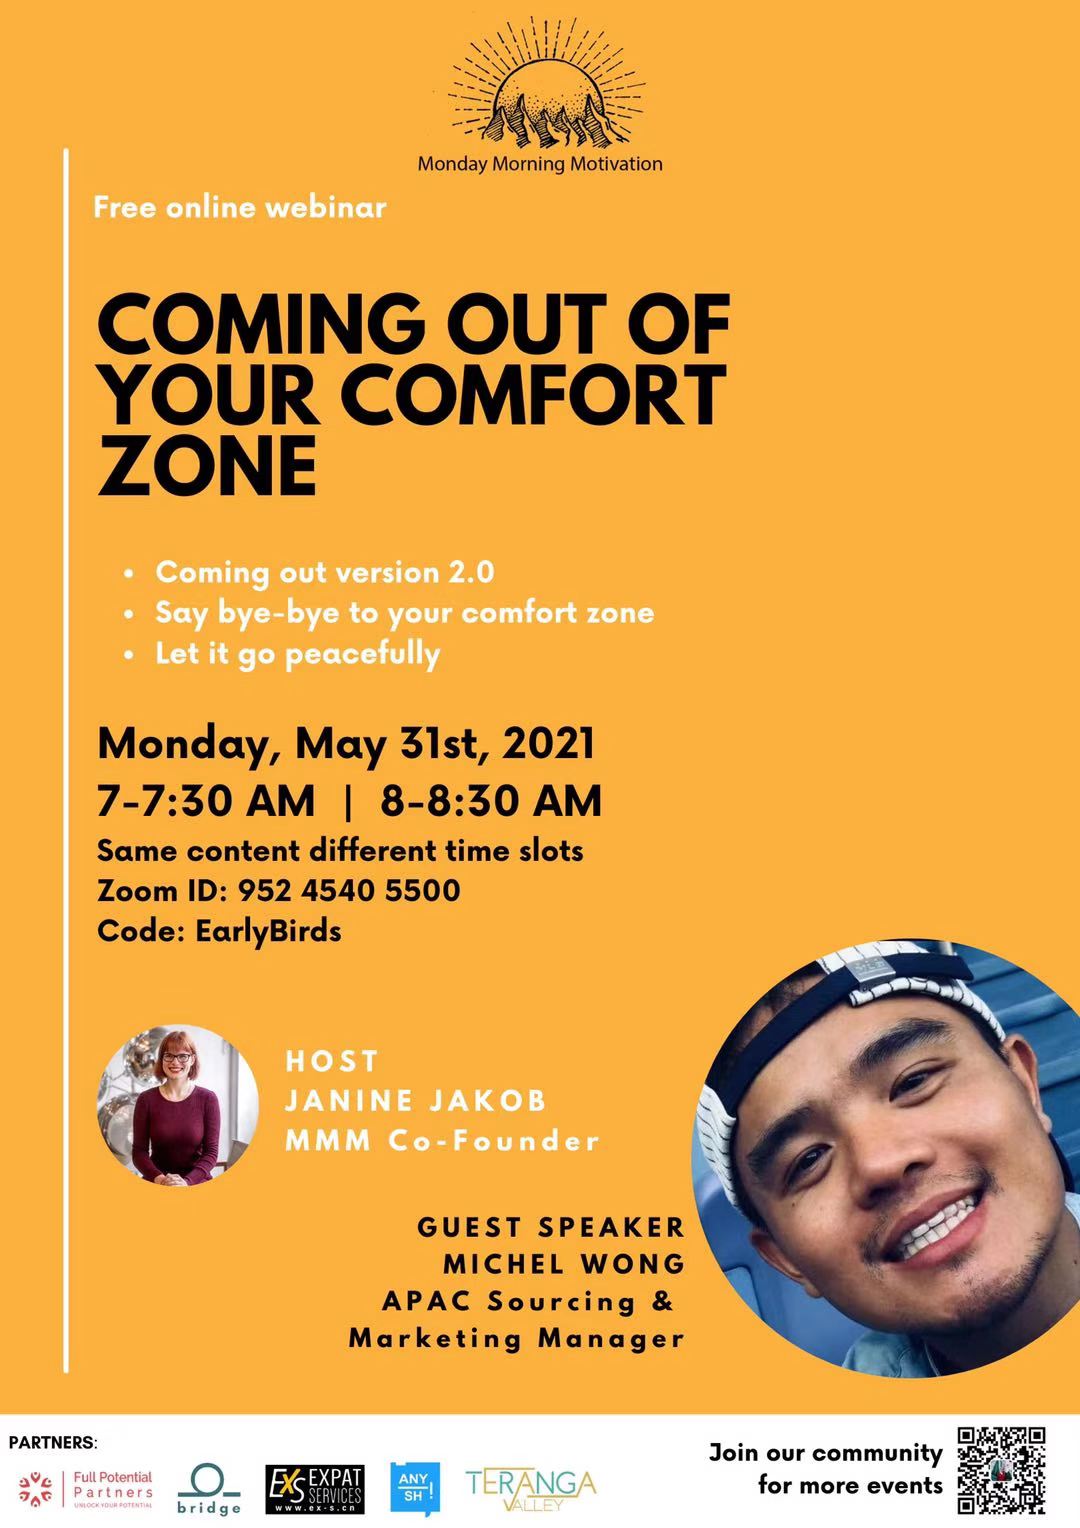 Coming out of your comfort zone | Shanghai Events